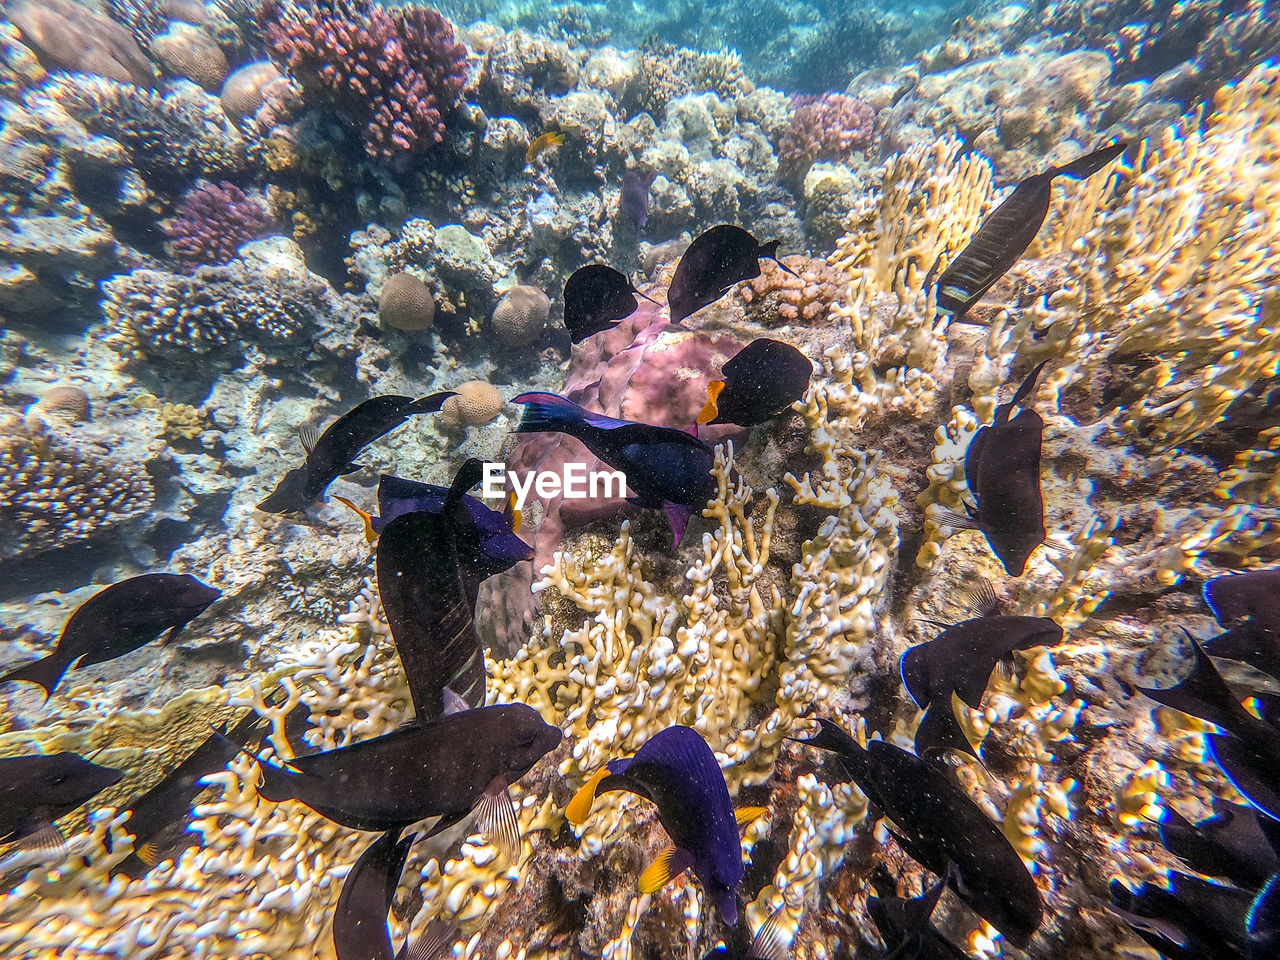 coral reef, sea, reef, water, undersea, underwater, marine biology, sea life, animal wildlife, wildlife, animal, coral, coral reef fish, animal themes, marine, nature, fish, aquarium, swimming, natural environment, beauty in nature, group of animals, outdoors, sunlight, large group of animals, marine invertebrates, multi colored, tropical fish, day